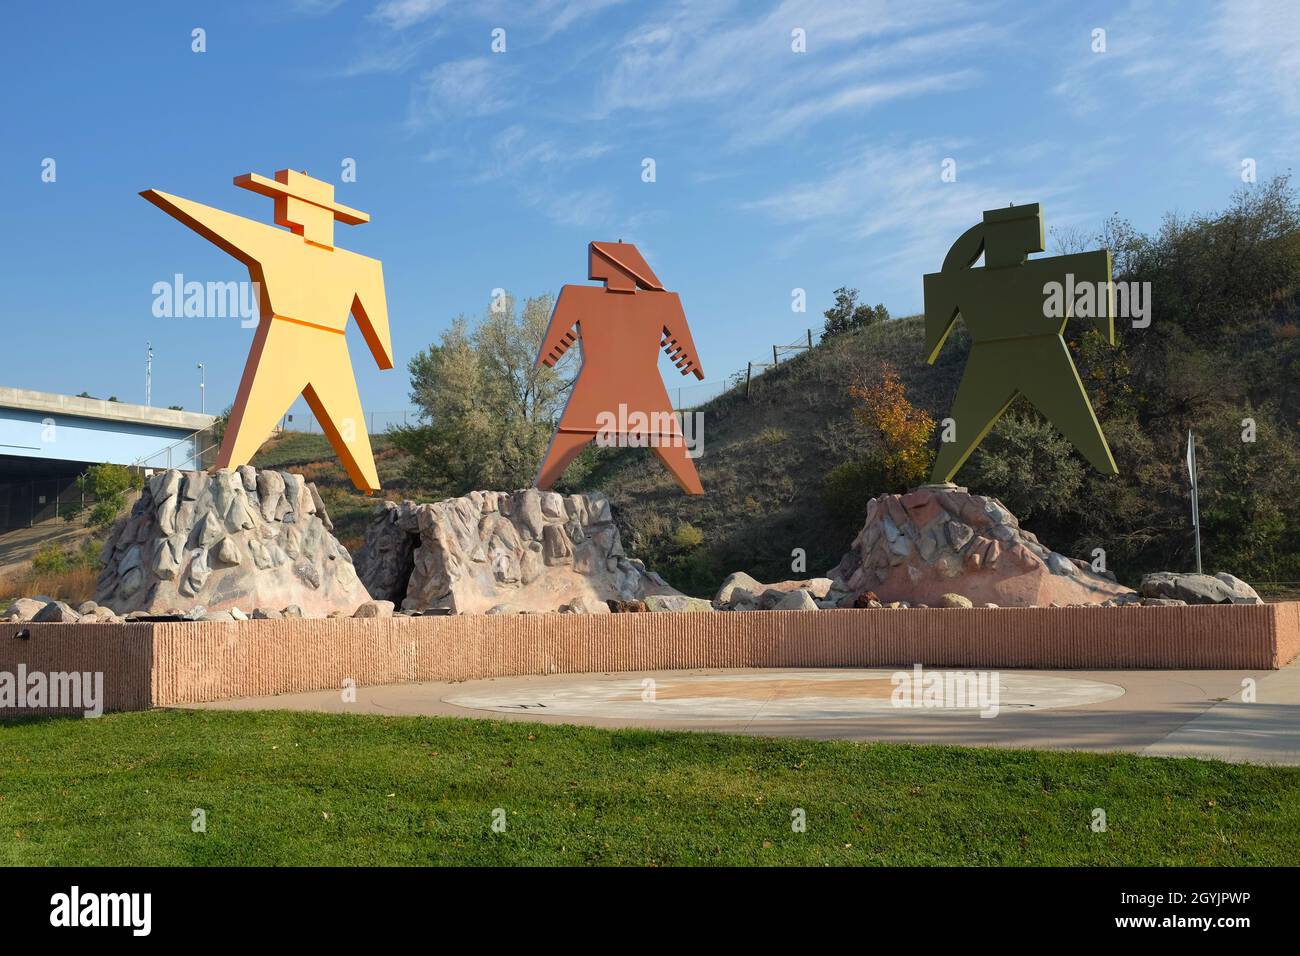 BISMARCK, NORTH DAKOTA - 3 OCT 2021: Lewis and Clark Sculpture in Keelboat Park, adjacent to the Missouri River and part of the Missouri Valley Legacy Stock Photo